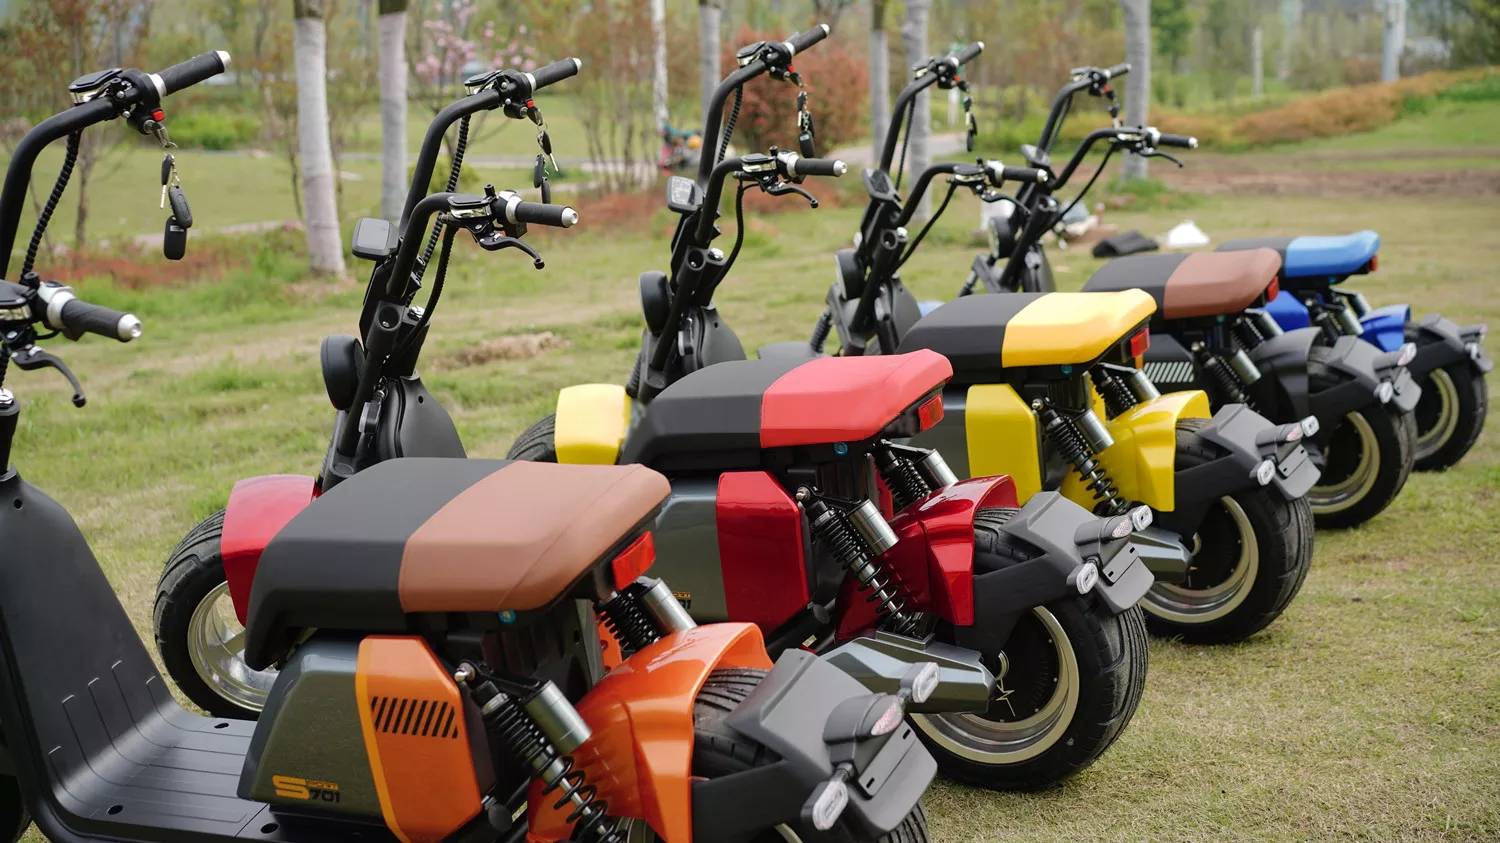 all colors sport 701 electric vehicle South Africa electric scooter electric motorbike EV SA Eleksa